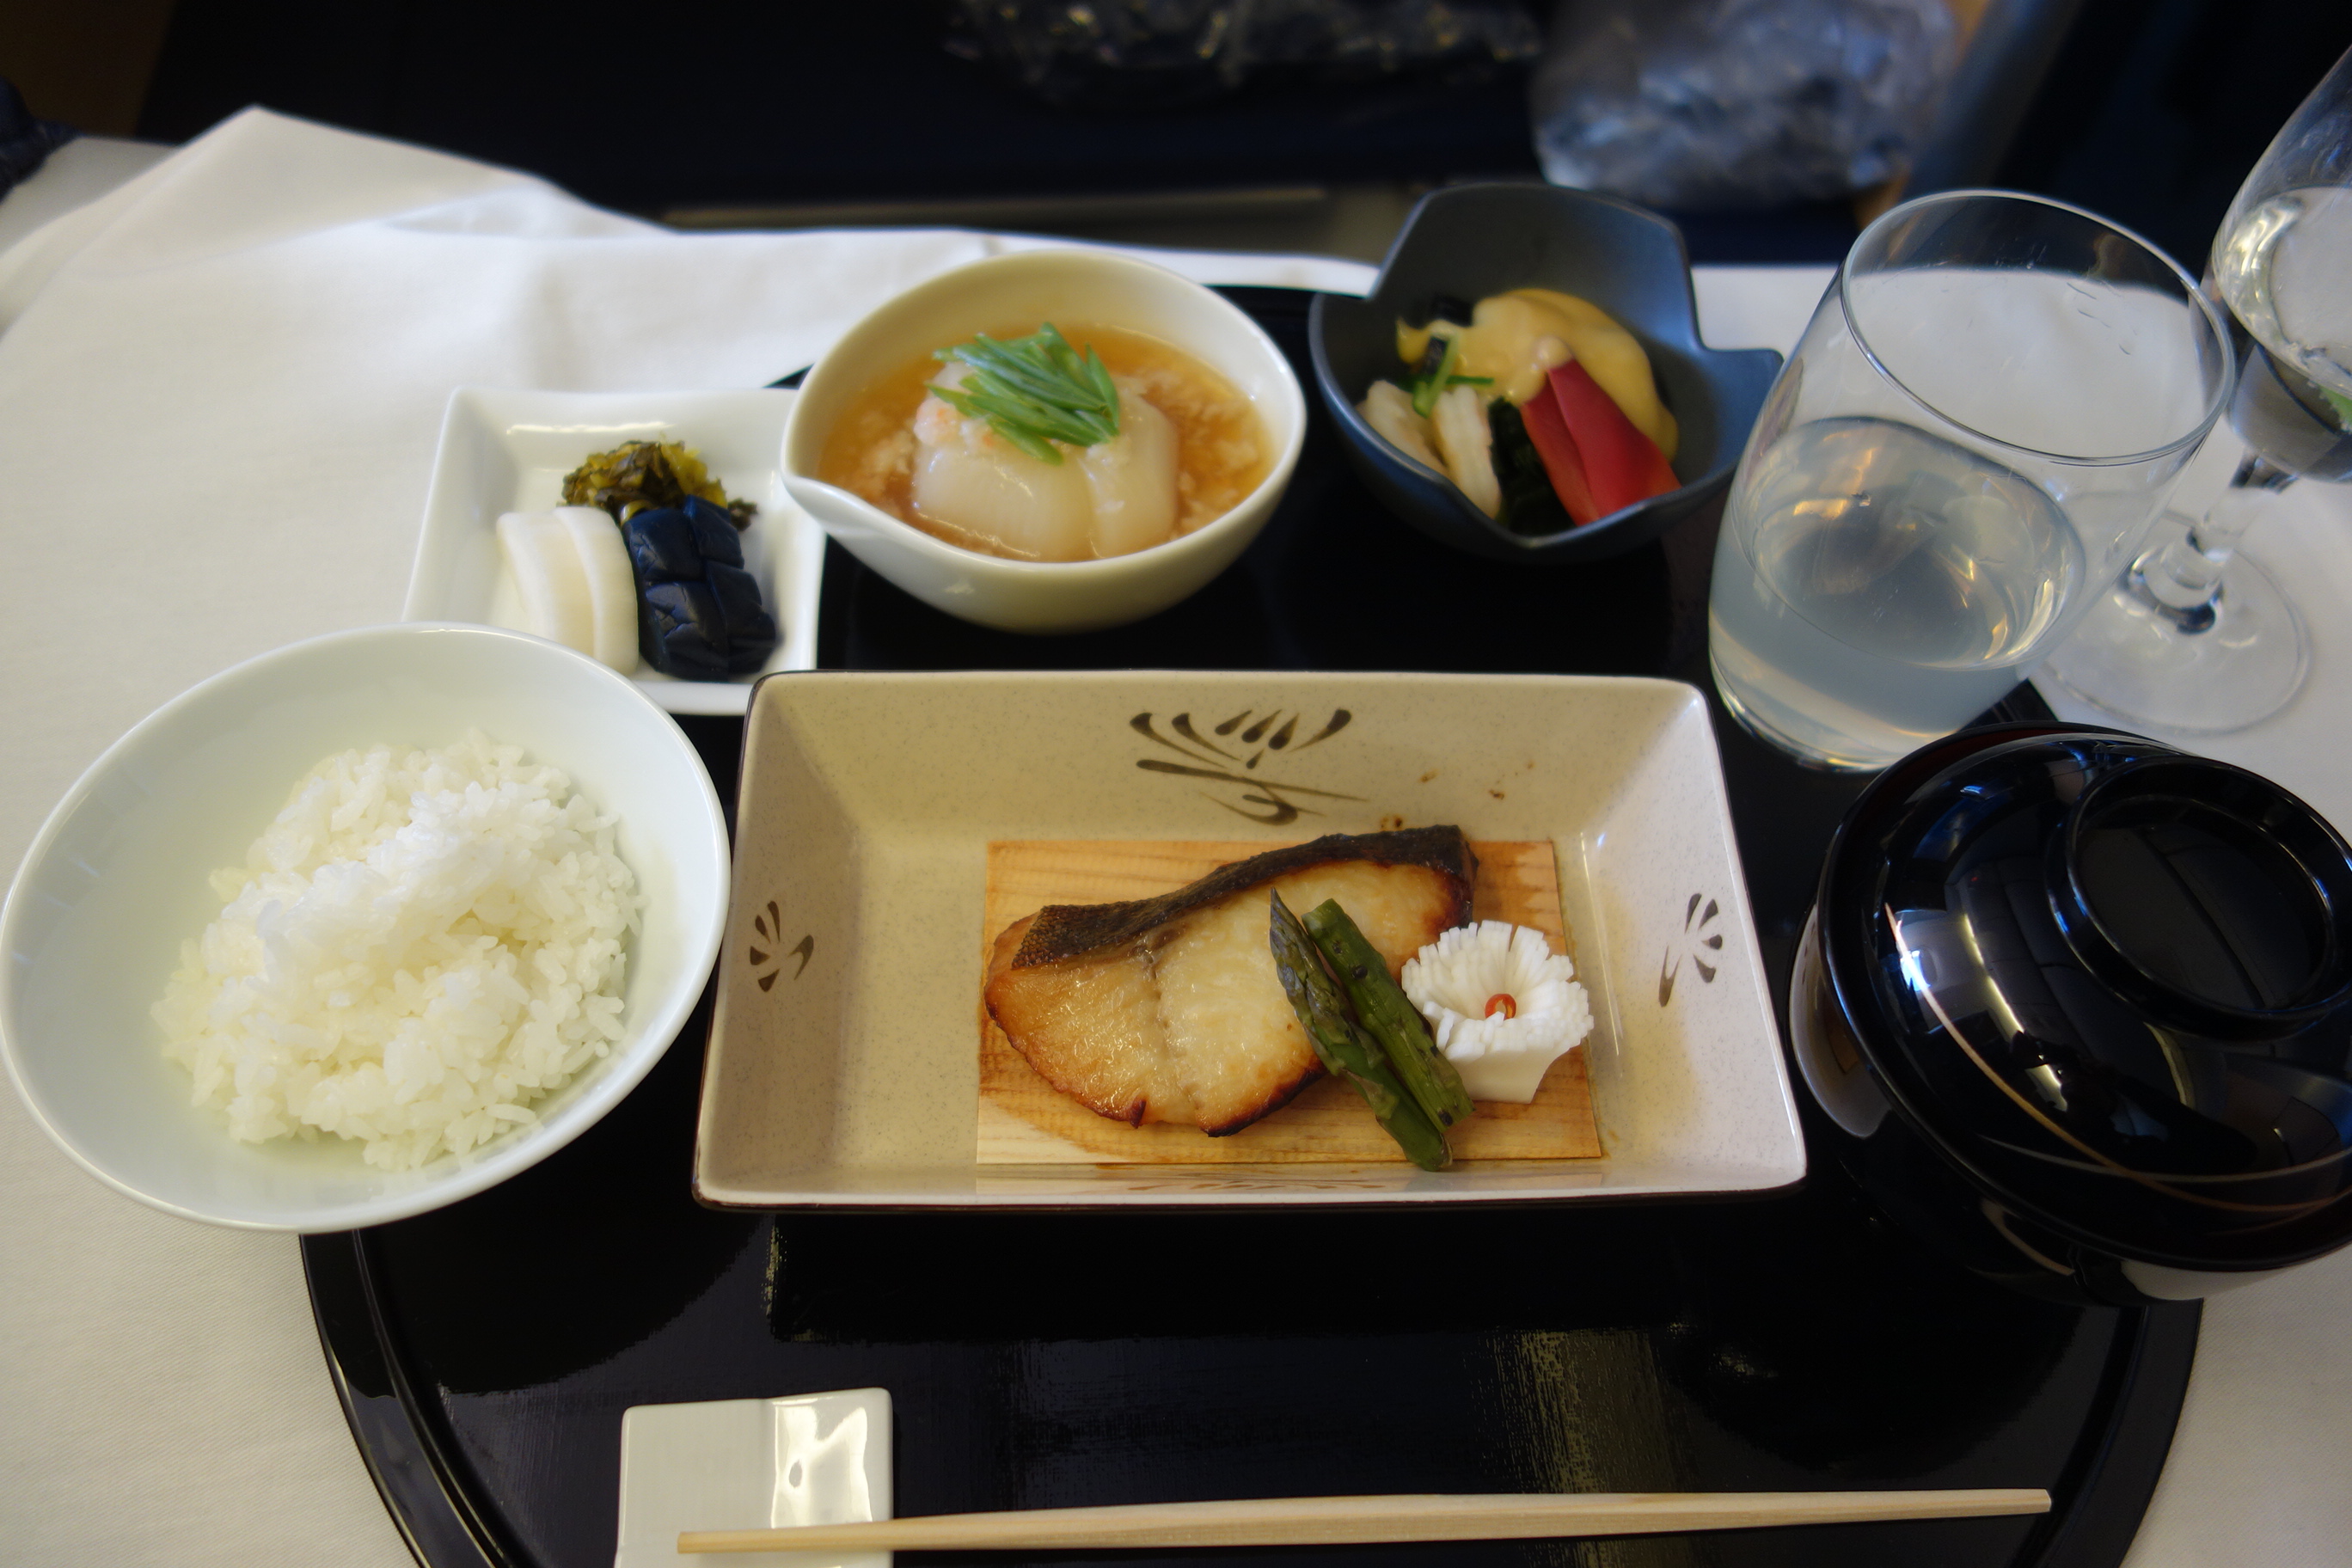 Simmered turnip, shrimp and surf clam, pickles, grilled sablefish, rice, miso soup